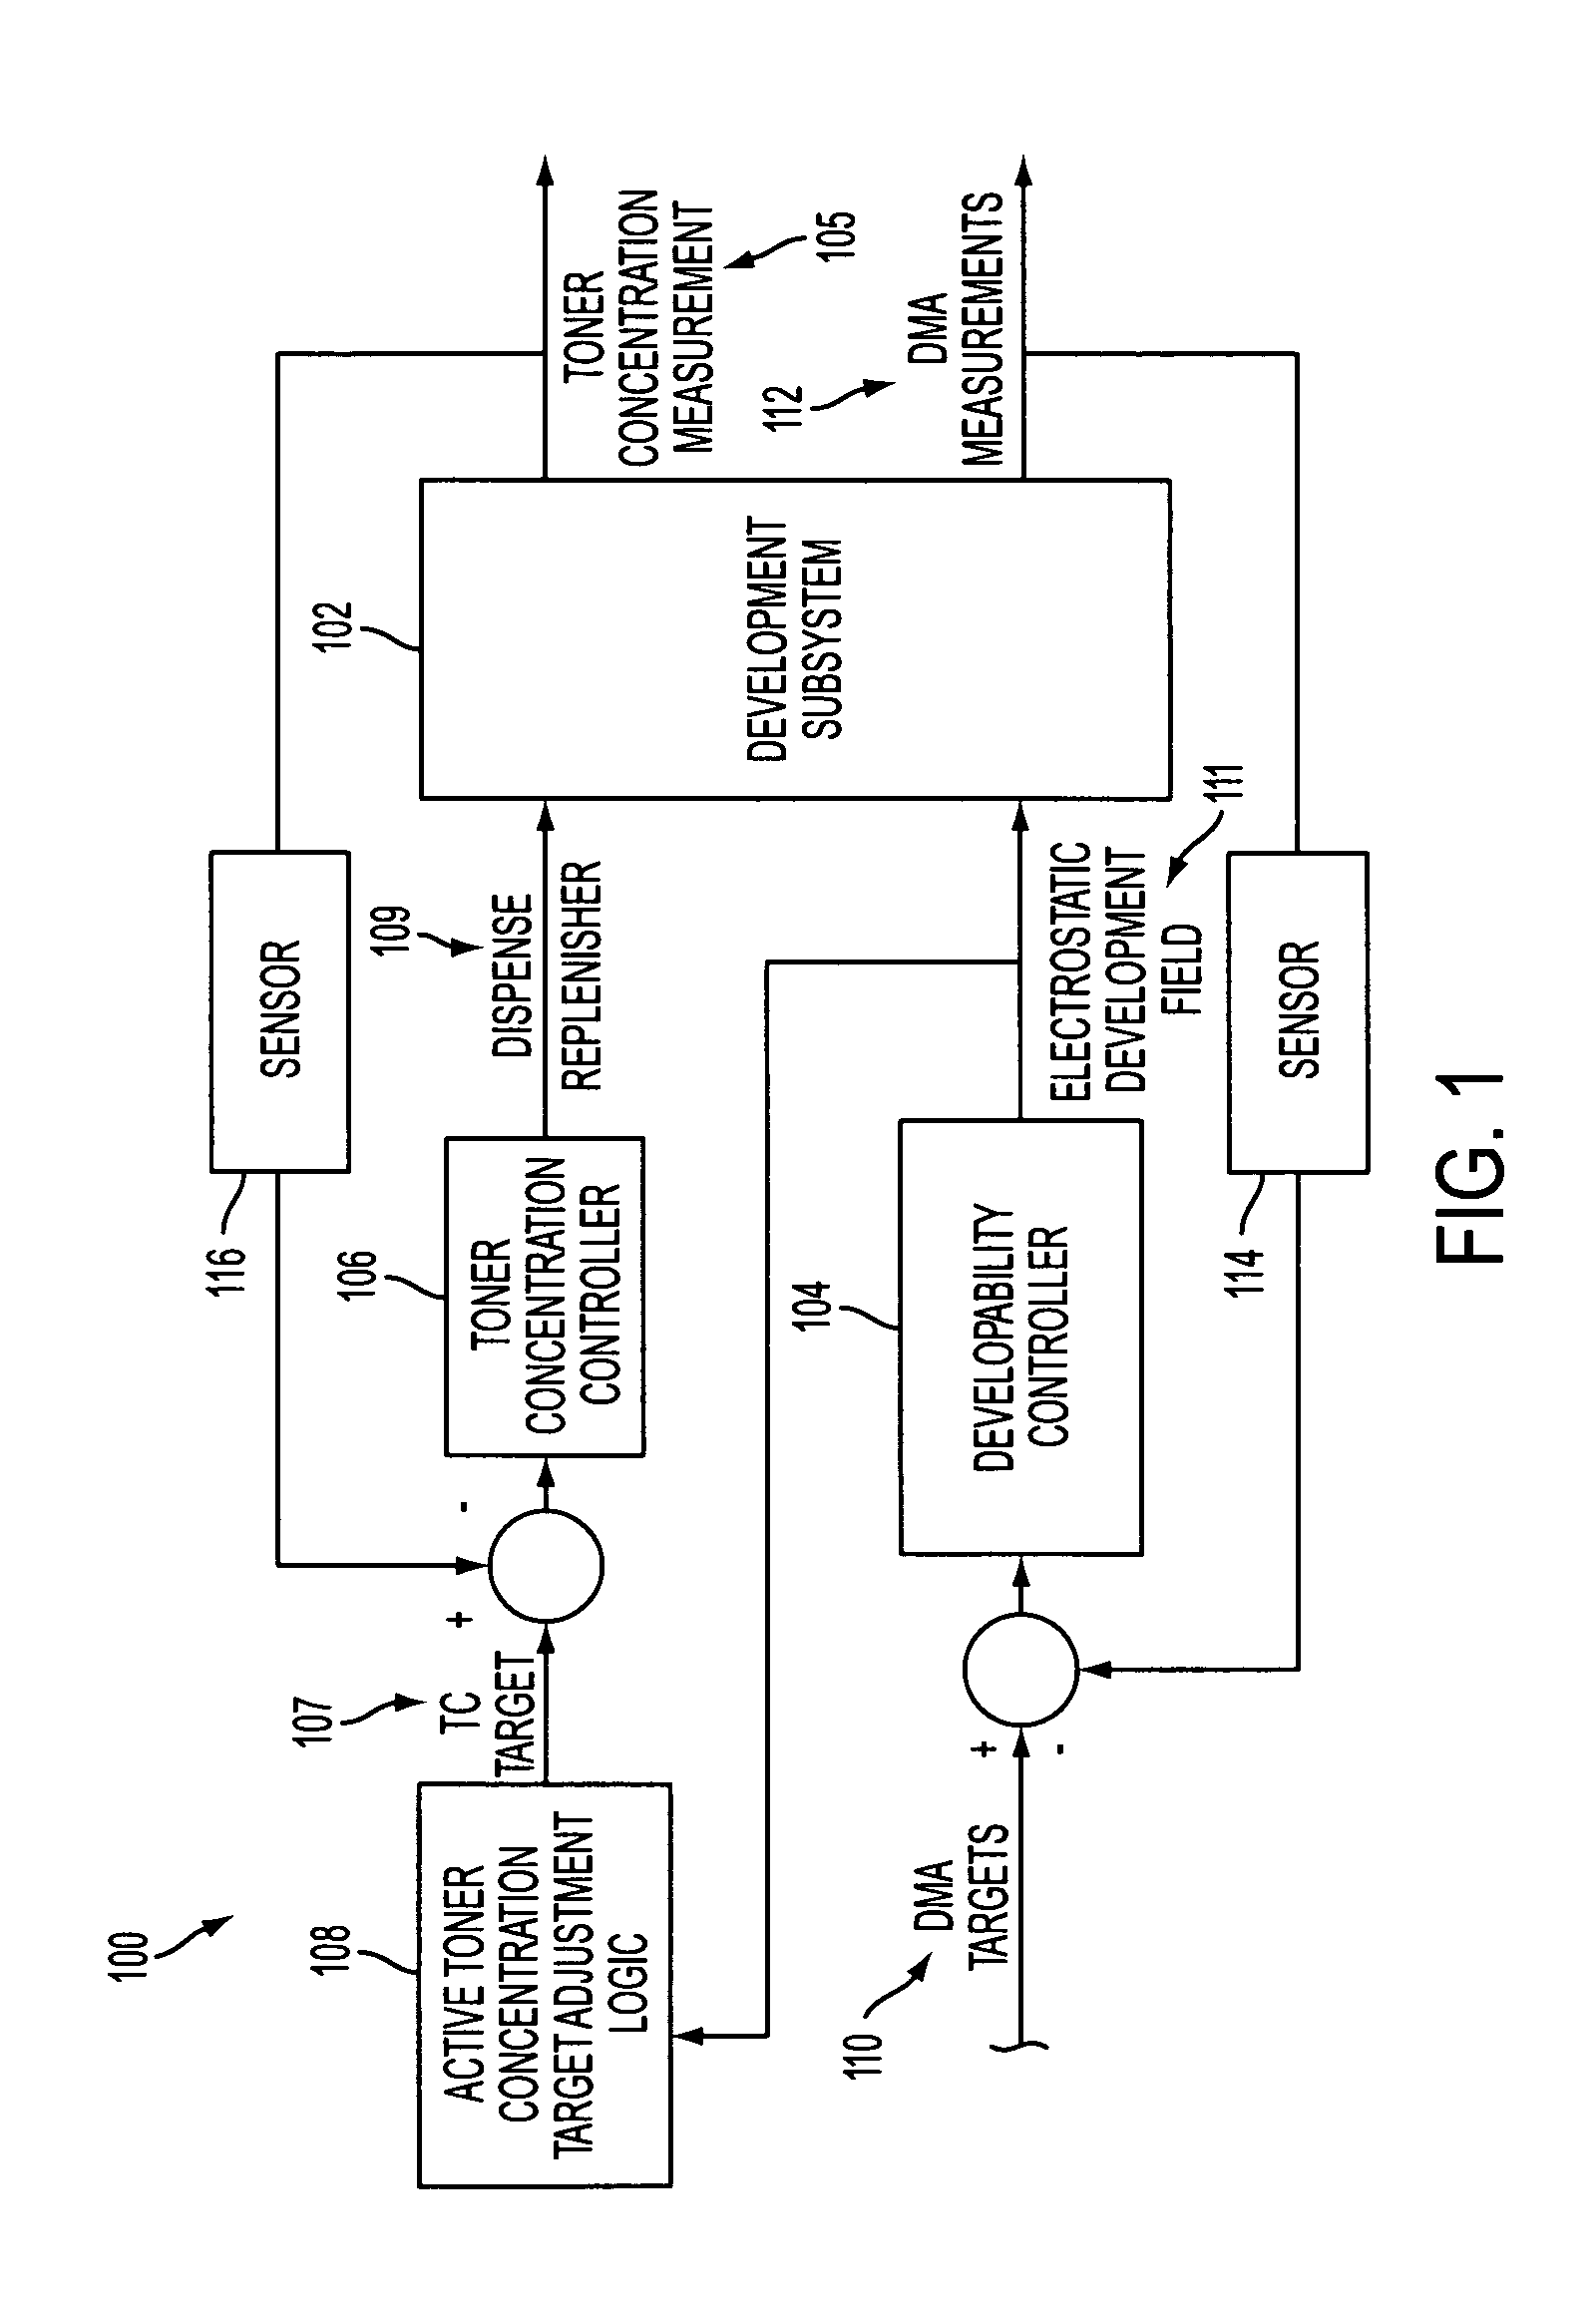 System for active toner concentration target adjustments and method to maintain development performance